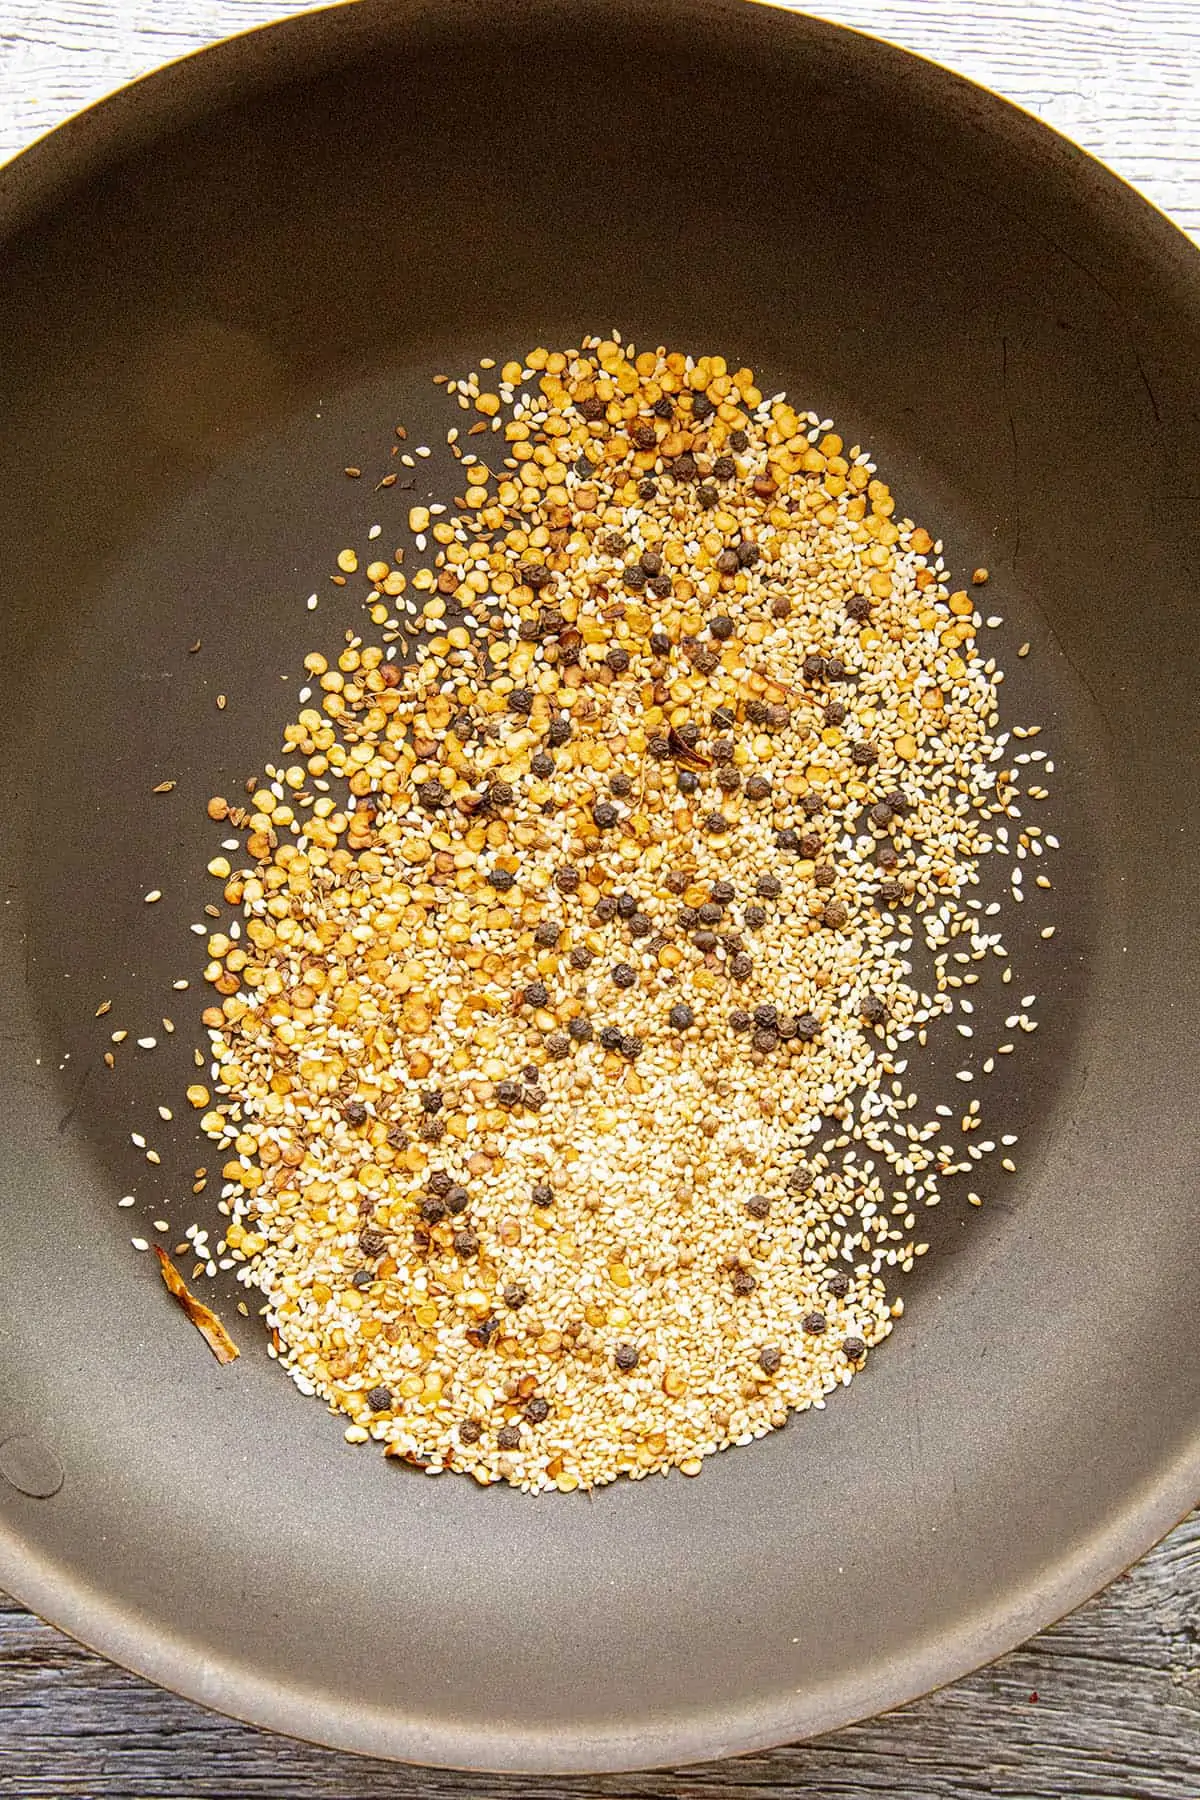 Toasting the seeds and seasonings in a hot pan